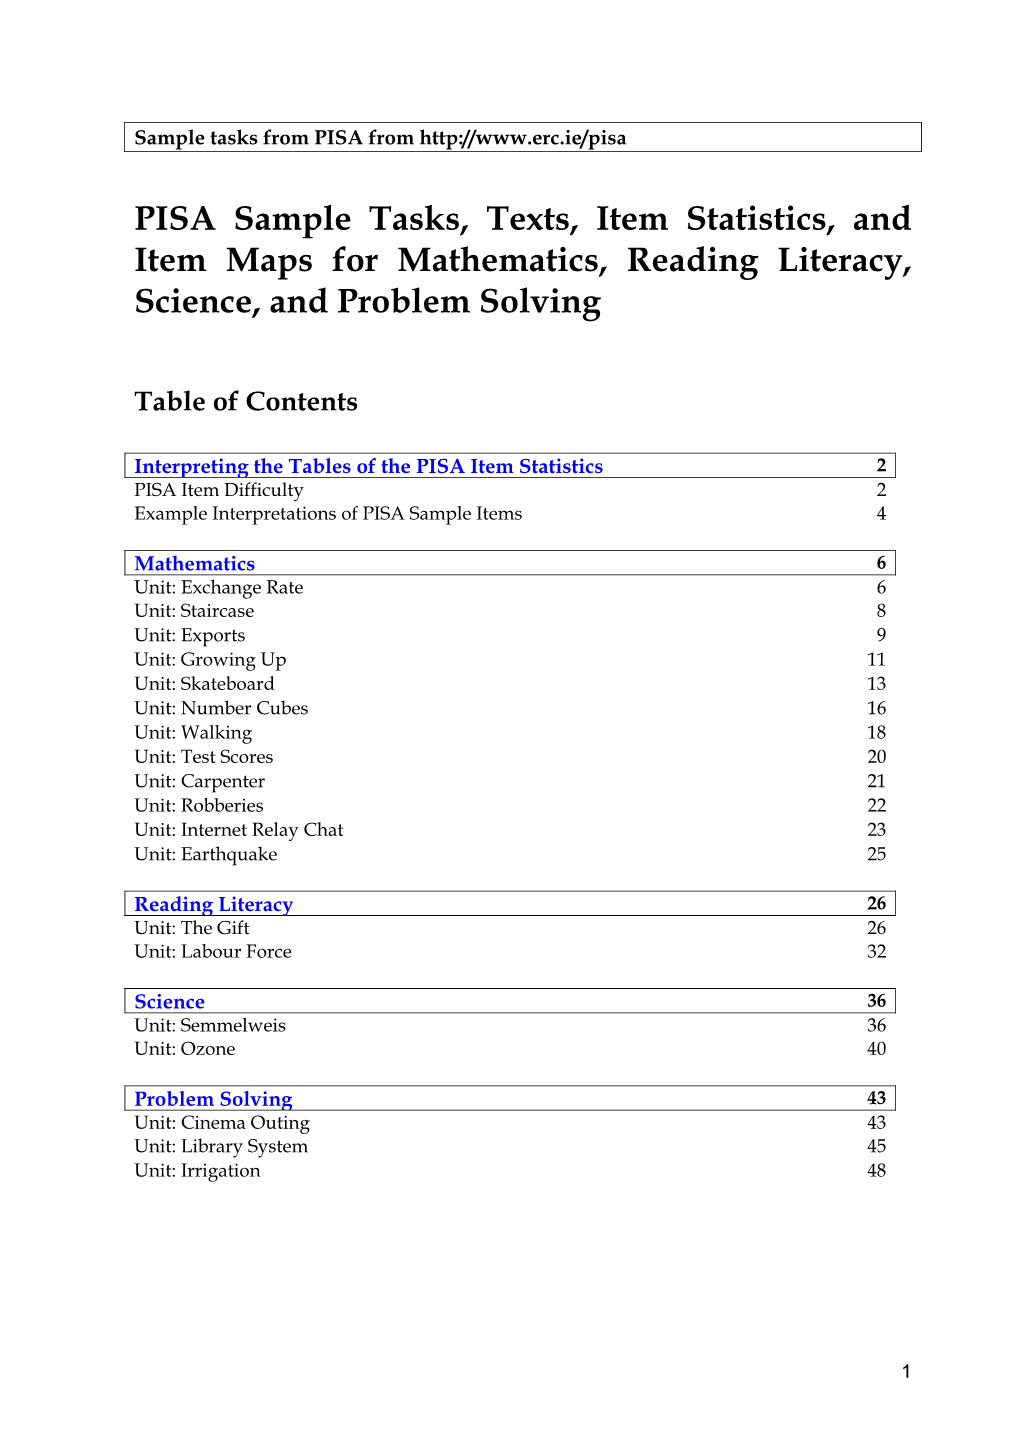 PISA Sample Tasks, Texts, Item Statistics, and Item Maps for Mathematics, Reading Literacy, Science, and Problem Solving